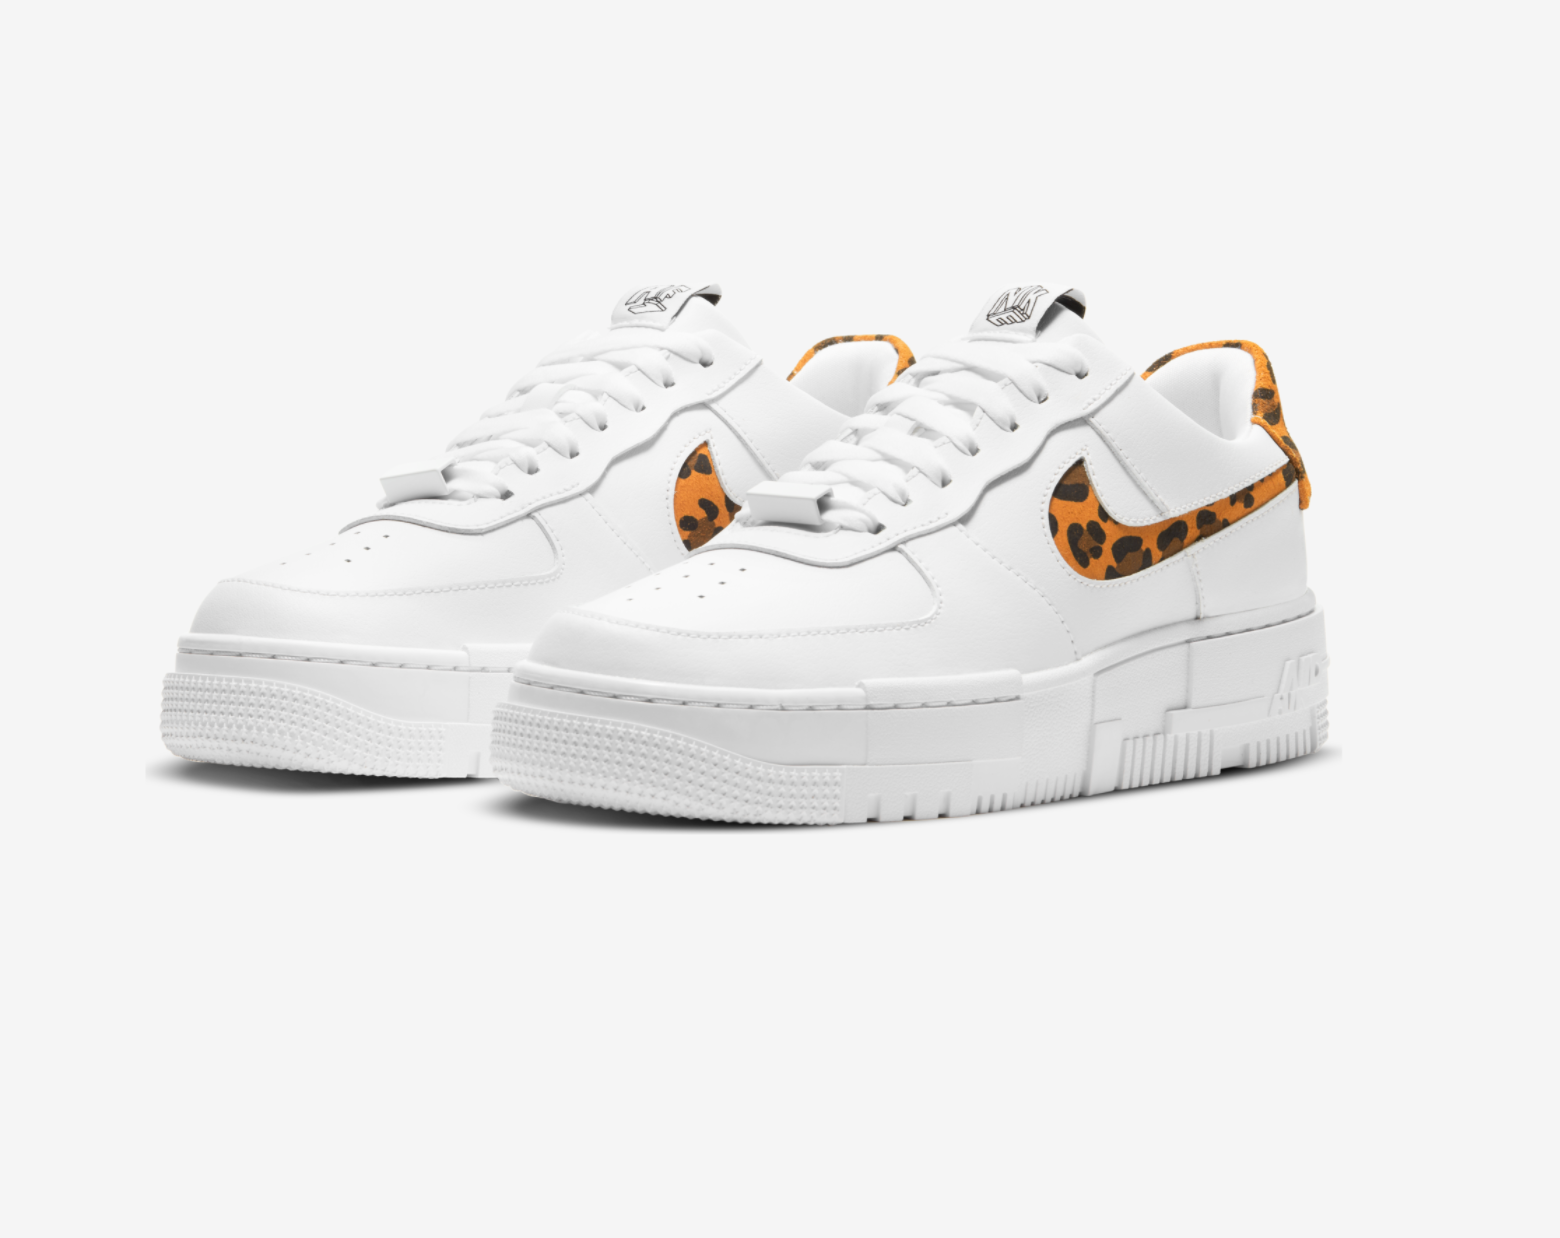 does nike student discount work on air force 1